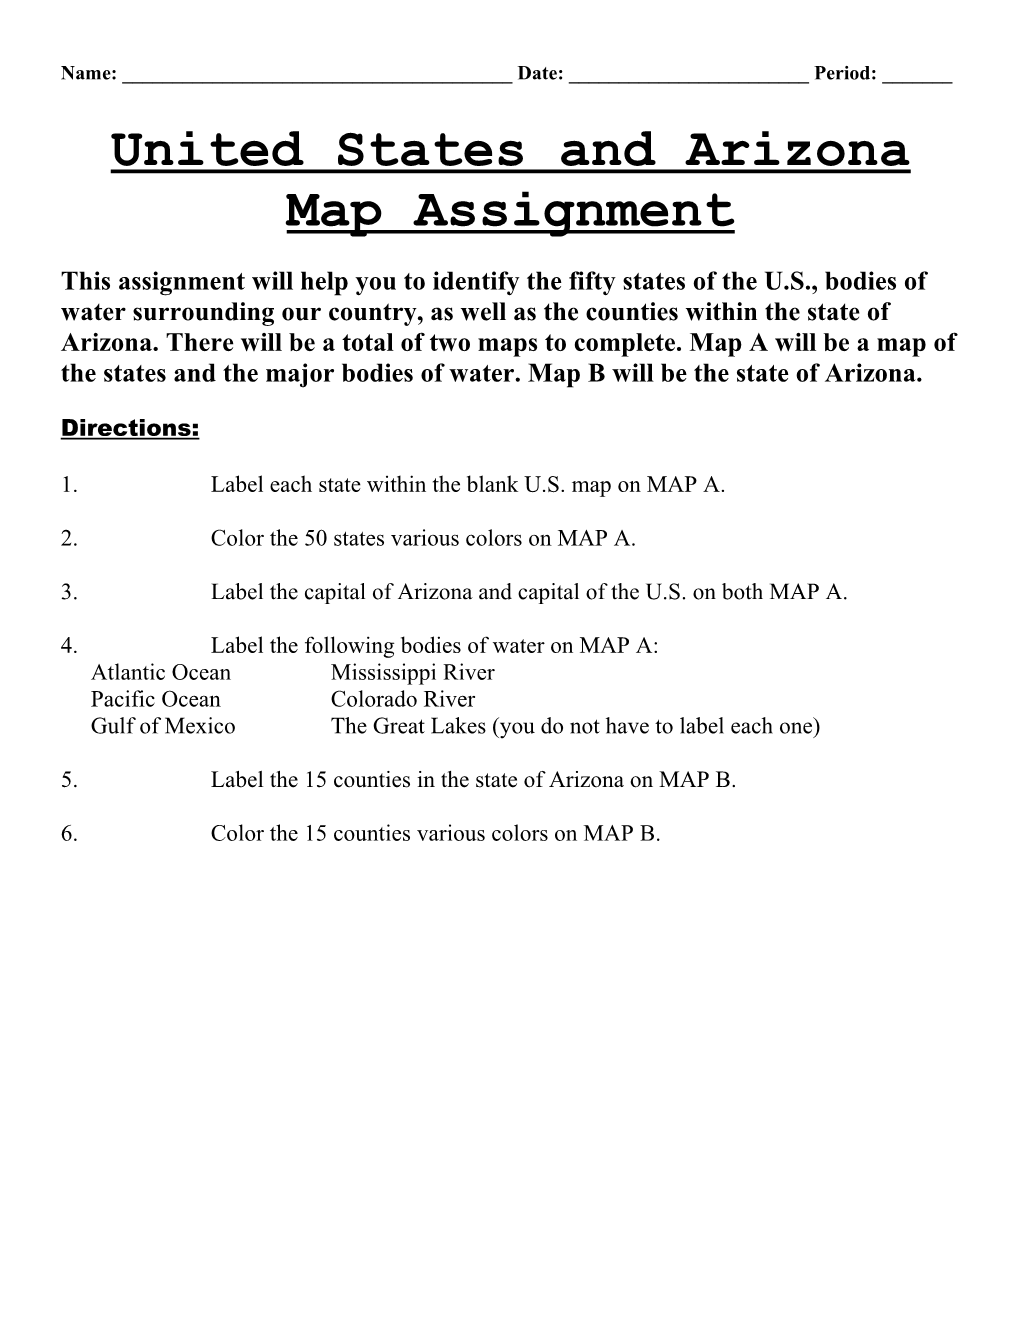 United States And Arizona Map Assignment